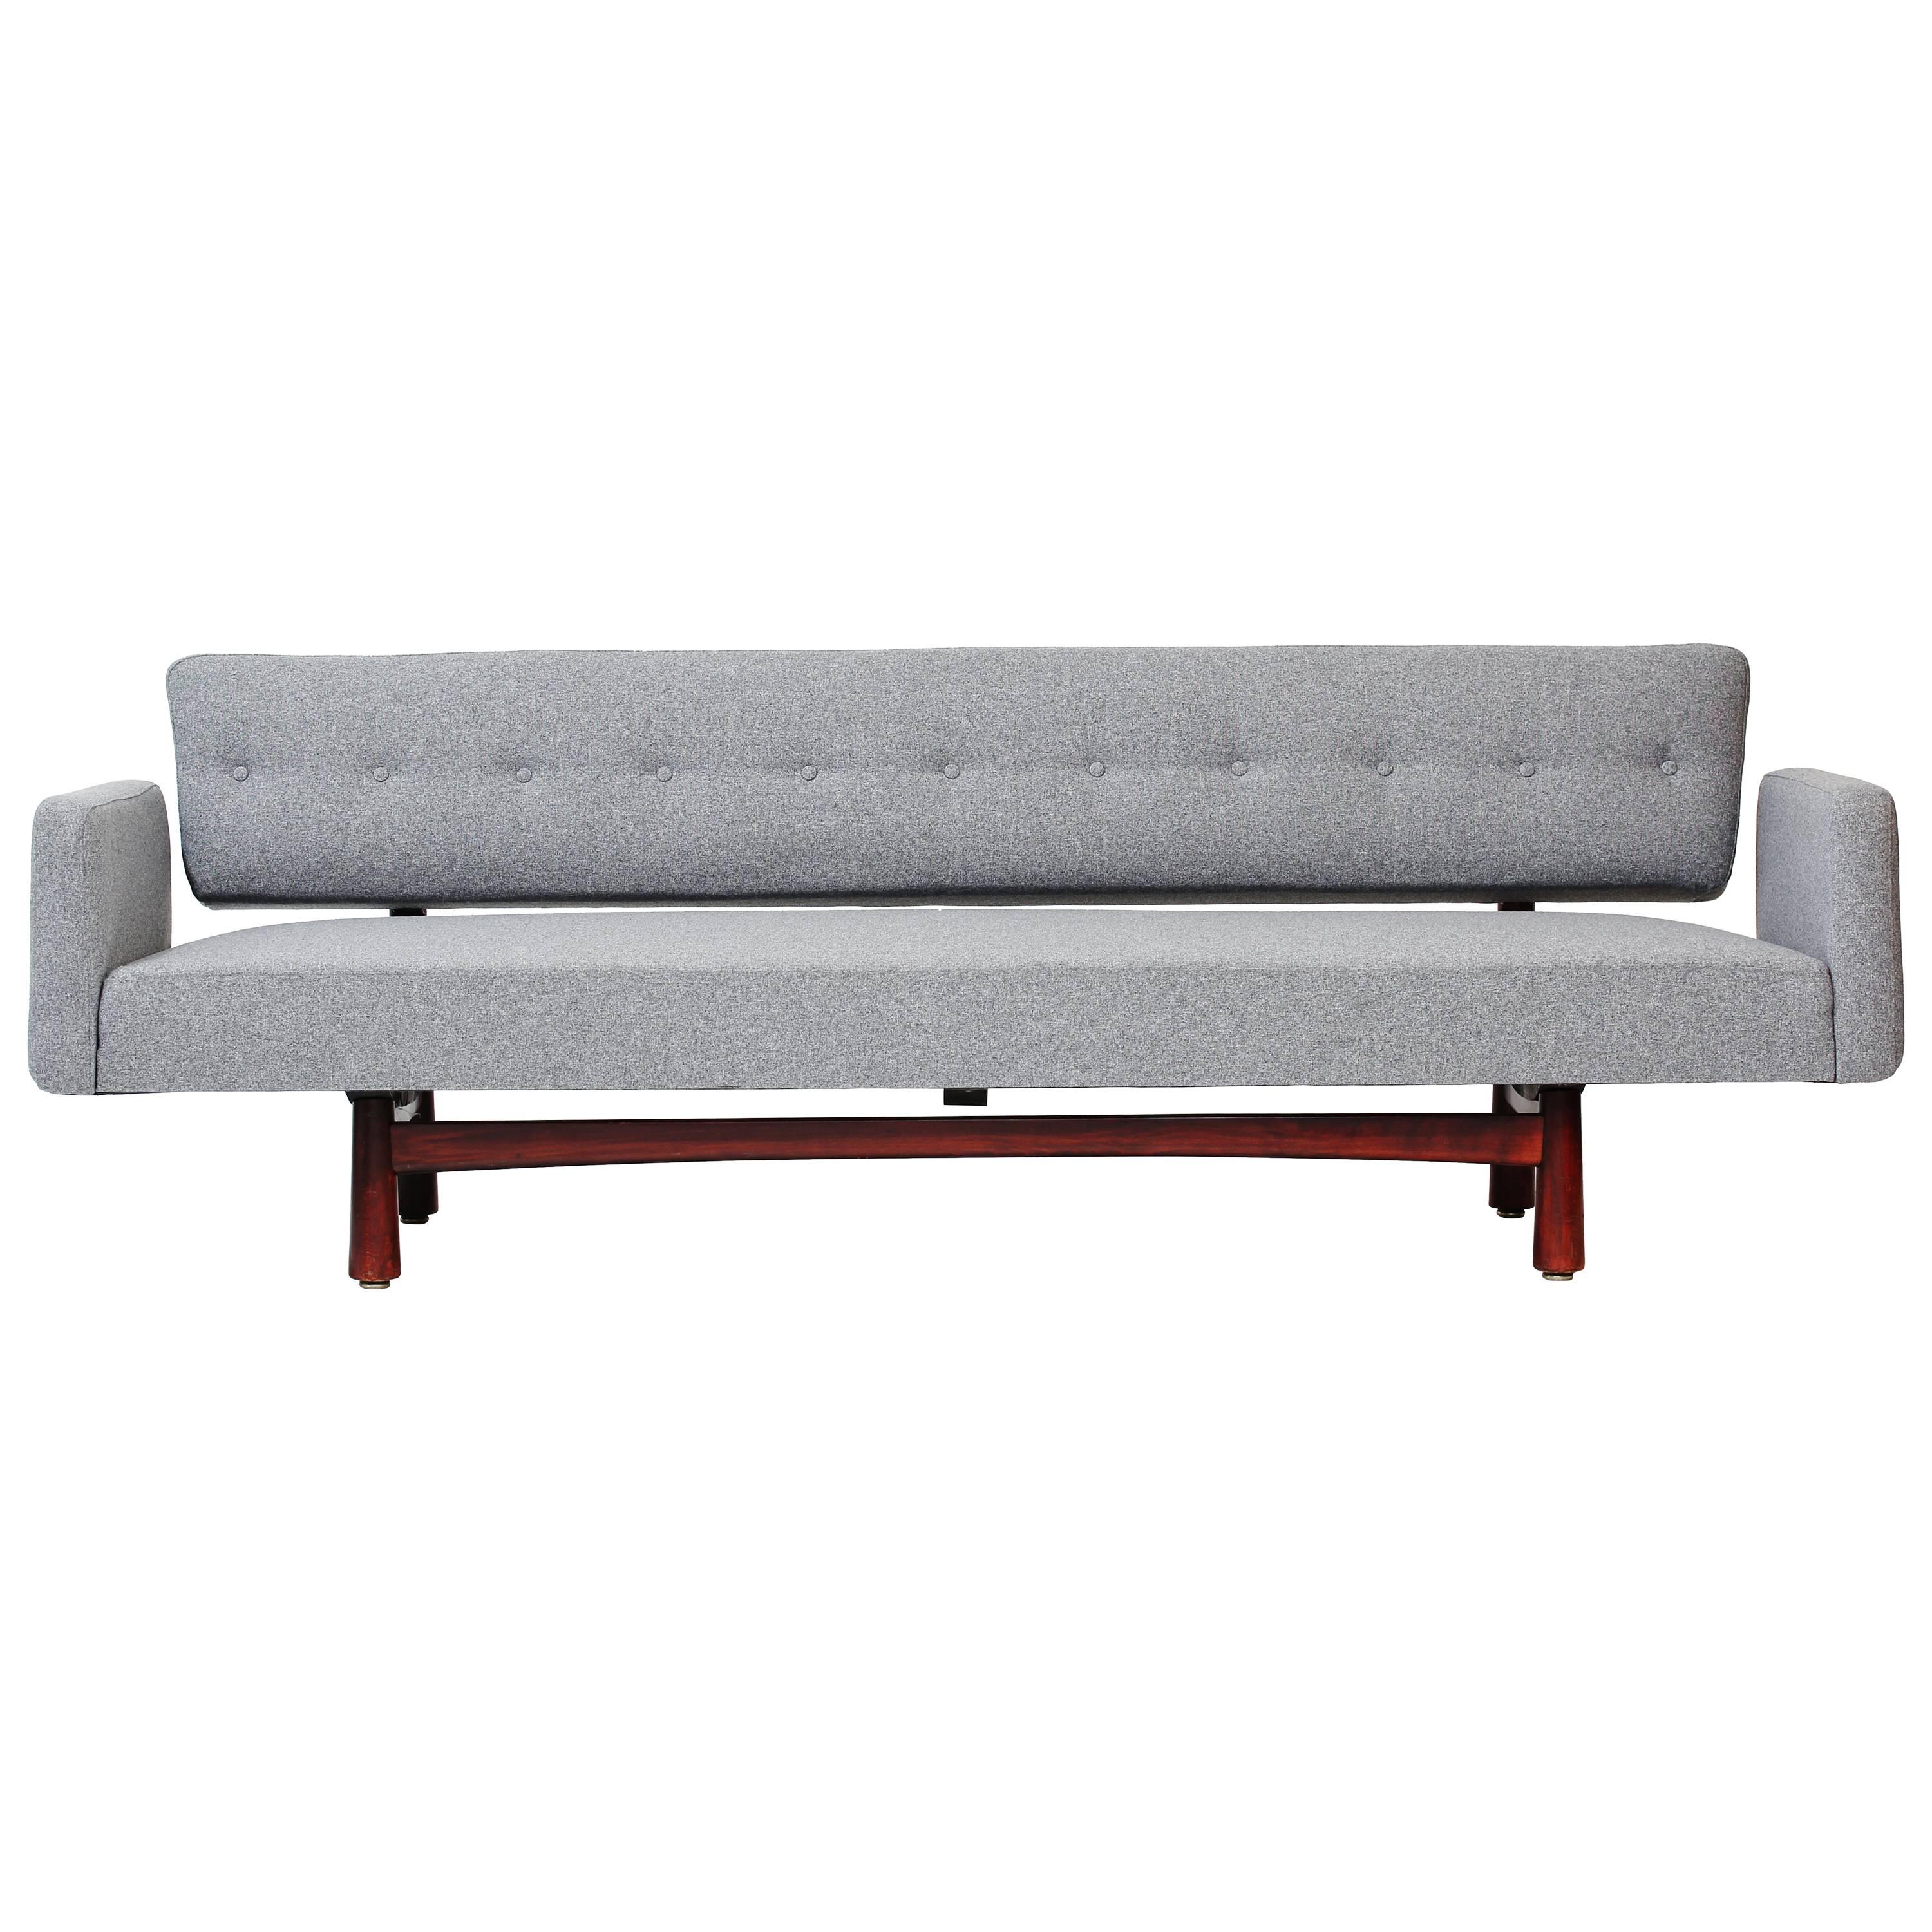 The iconic New York sofa by Edward Wormley stands out in any room with its simplistic, beautiful lines and great style. Originally these were made by Dunbar in the US but were licensed to the Swedish company Ljungs industrier AB. Reupholstered and